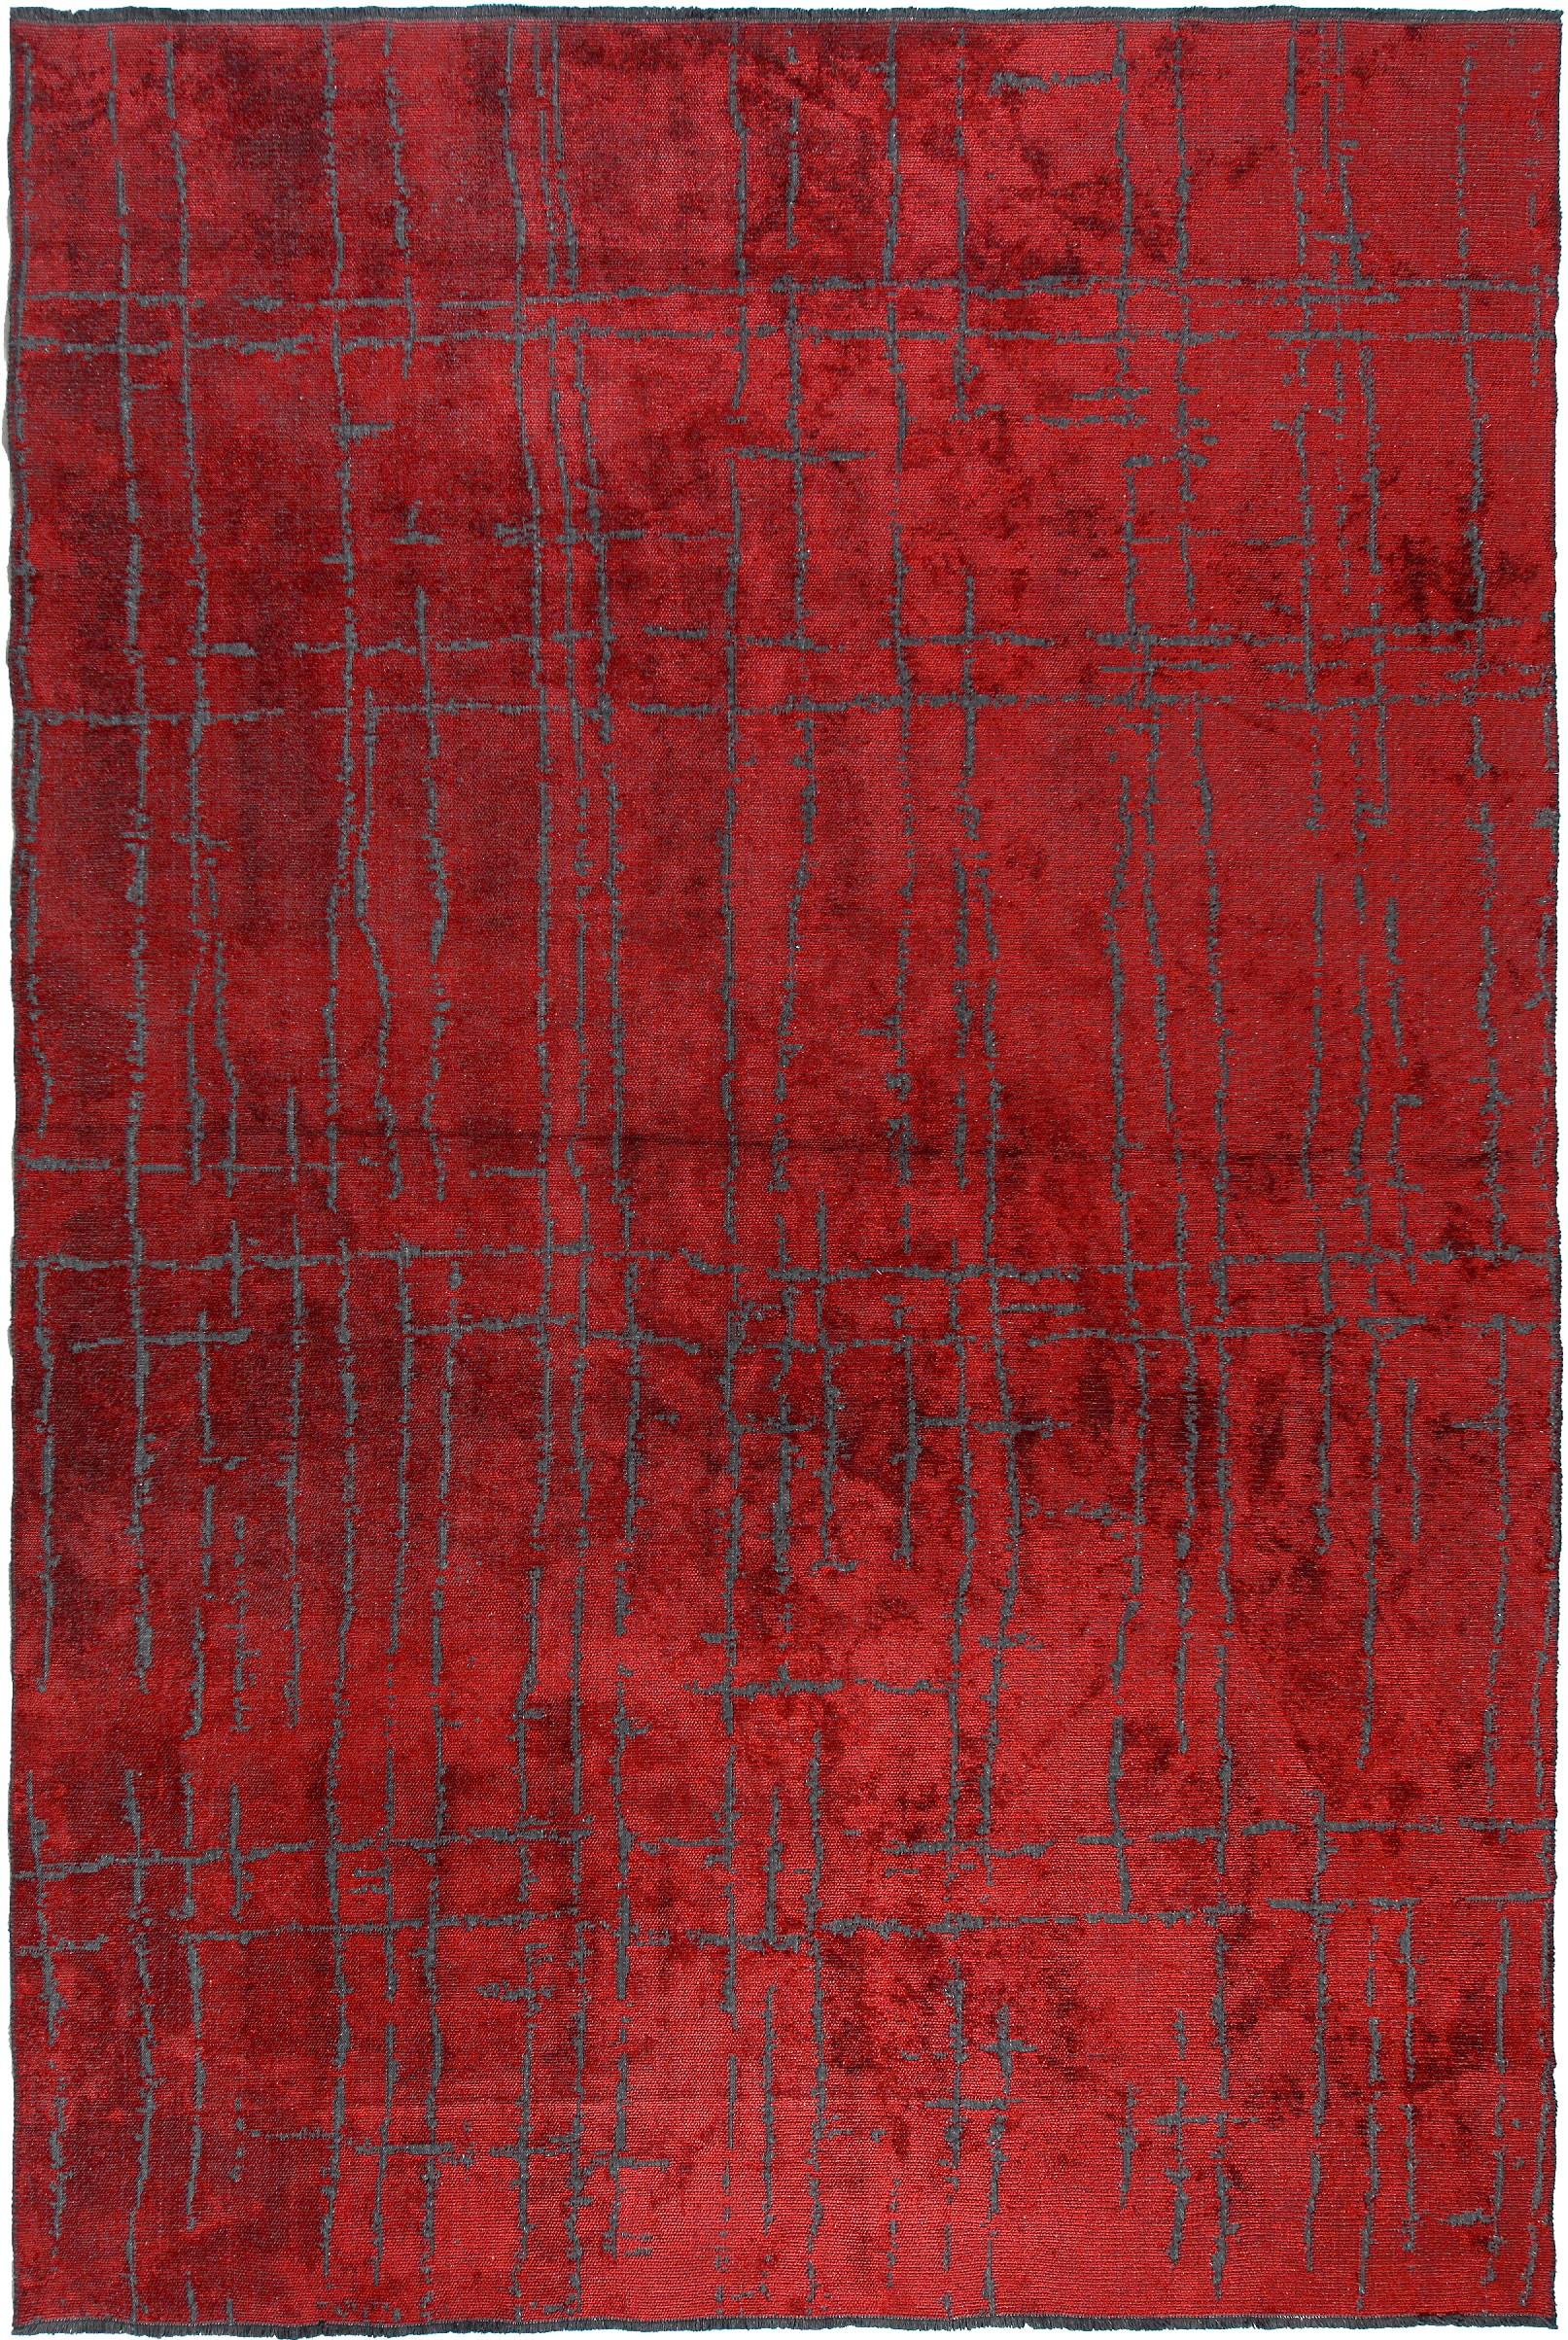 For Sale:  (Red) Modern Abstract Luxury Hand-Finished Area Rug